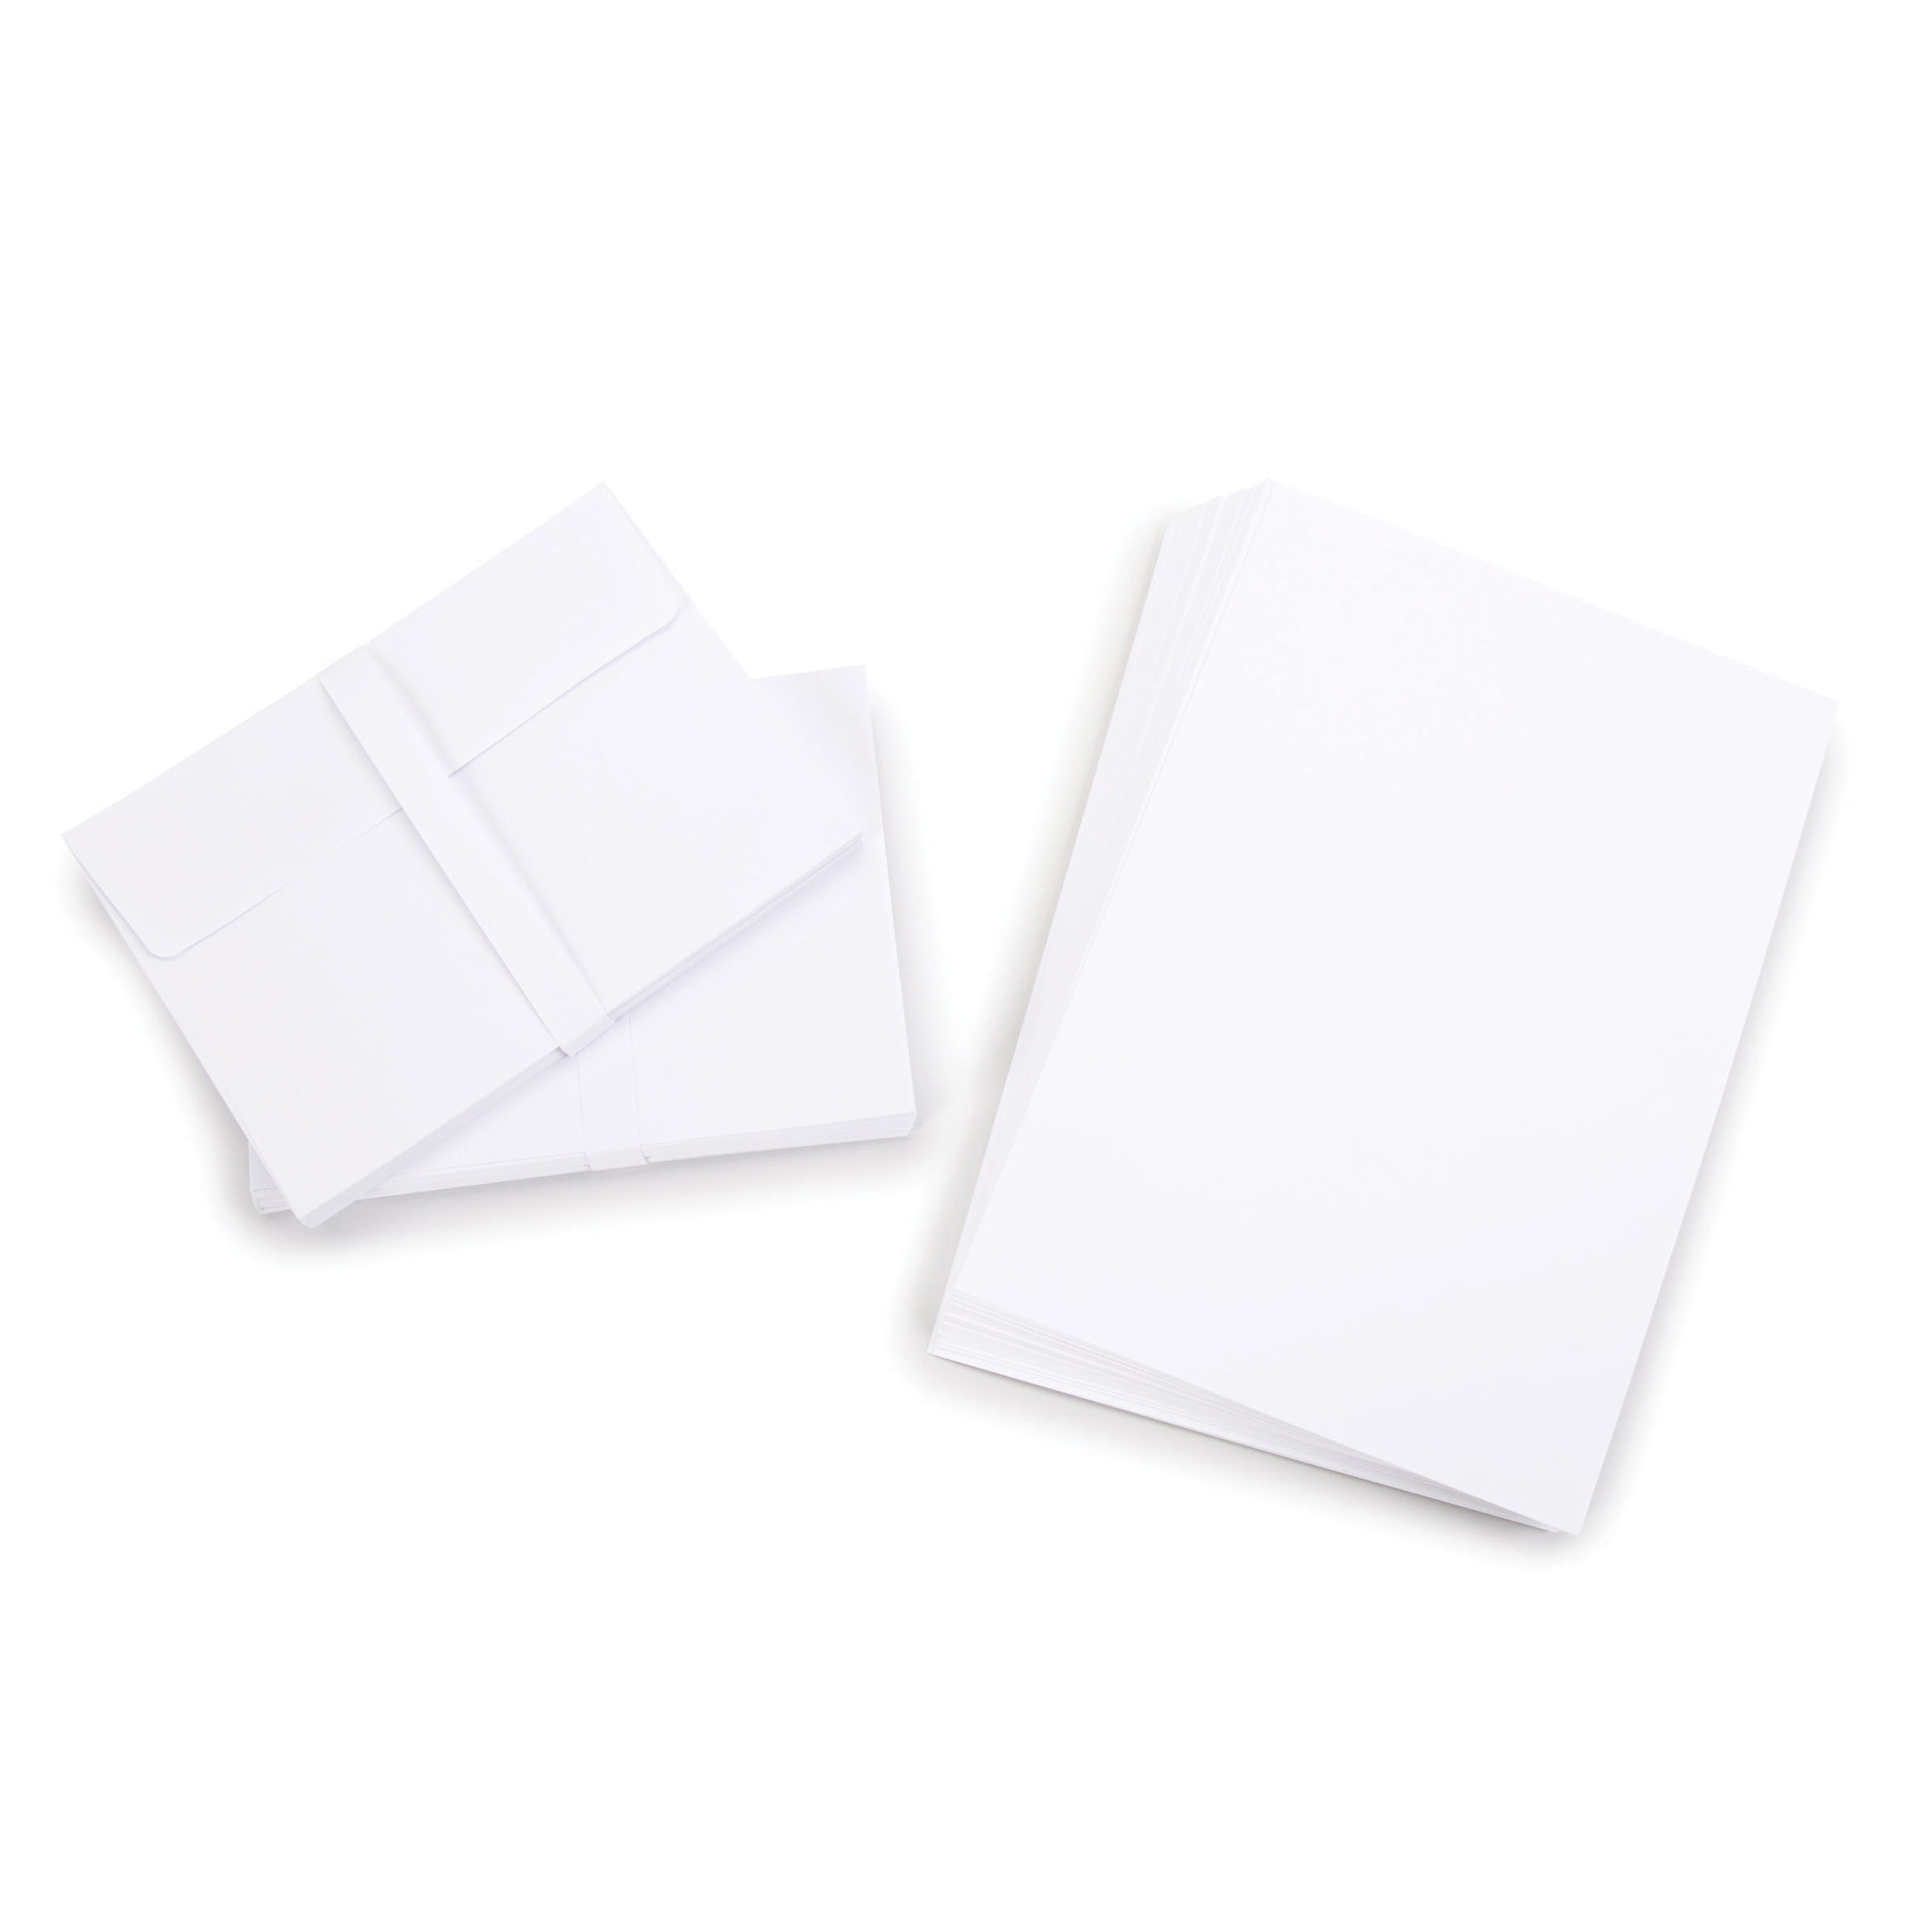 scored 50 cardsenvelopes 5X7 premium heavy weight cardstock paper crafting Darice blank cards and envelope set,white card making